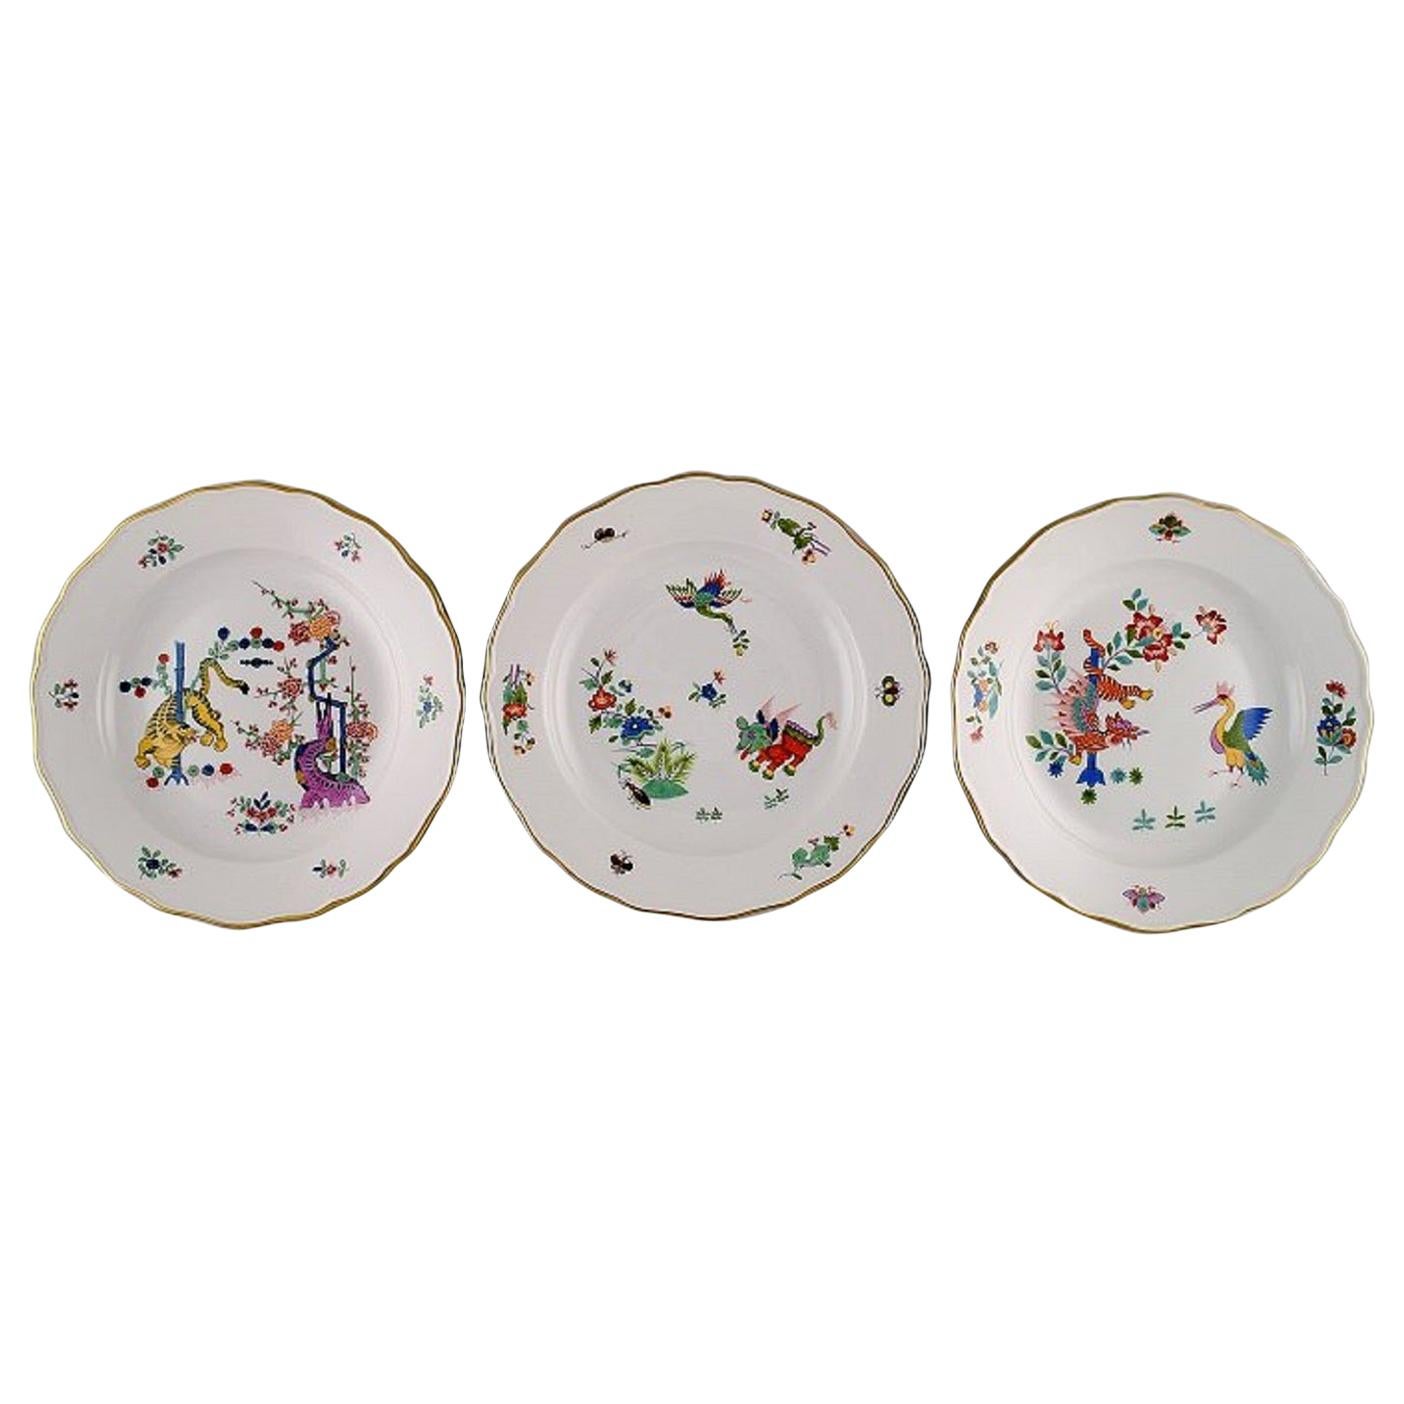 Three "Kakiemon" Meissen Plates Decorated with Japanese Motifs, circa 1900 For Sale